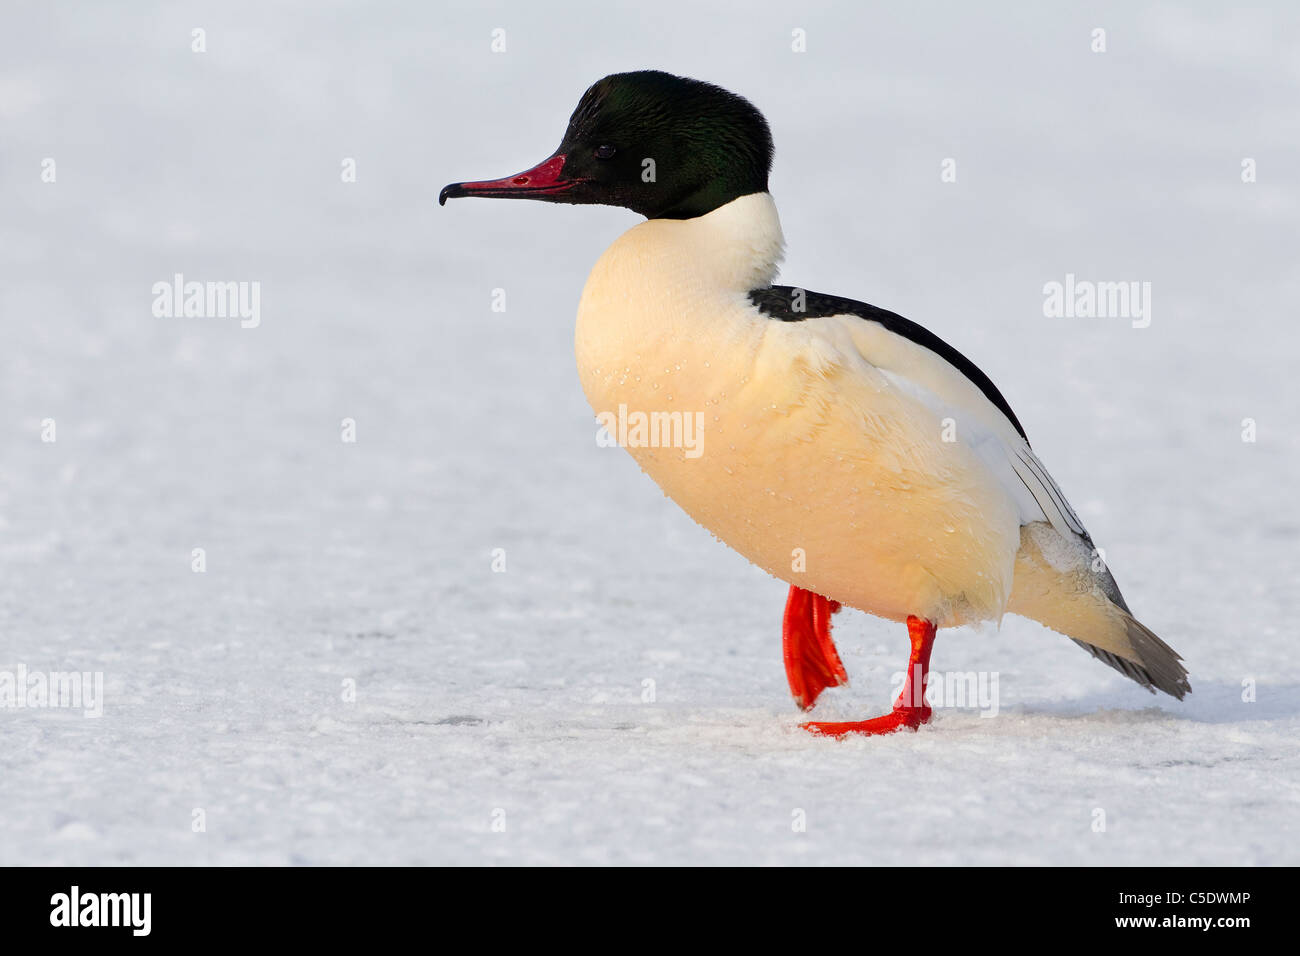 Close-up side view of a Goosander walking on ice Stock Photo